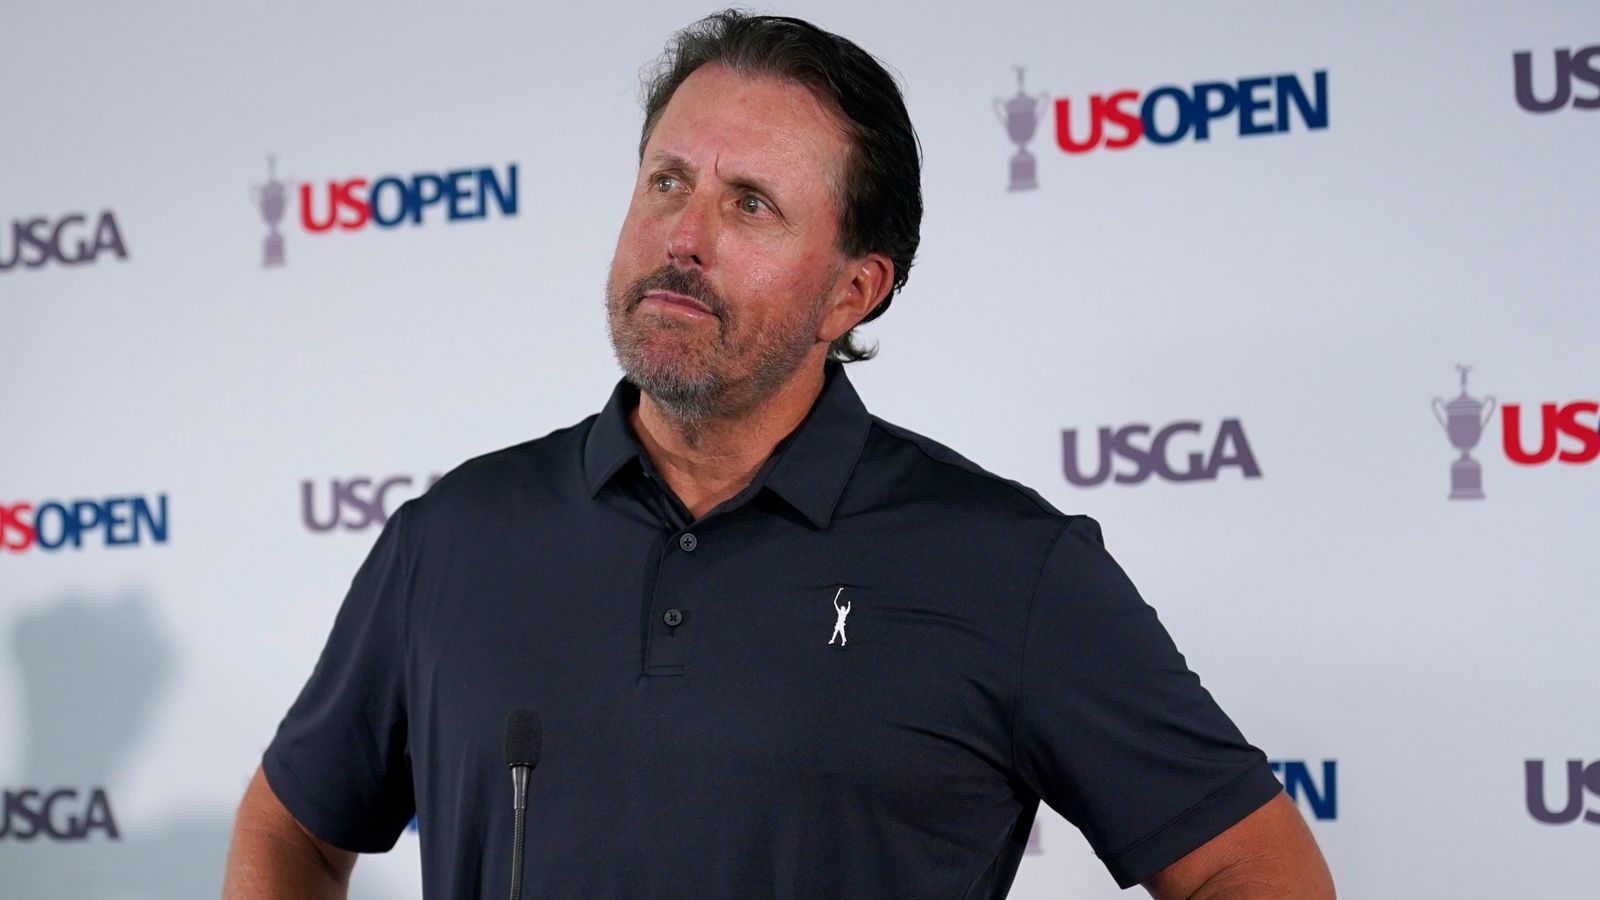 Phil Mickelson and three other LIV Golf players pull out of lawsuit against PGA Tour